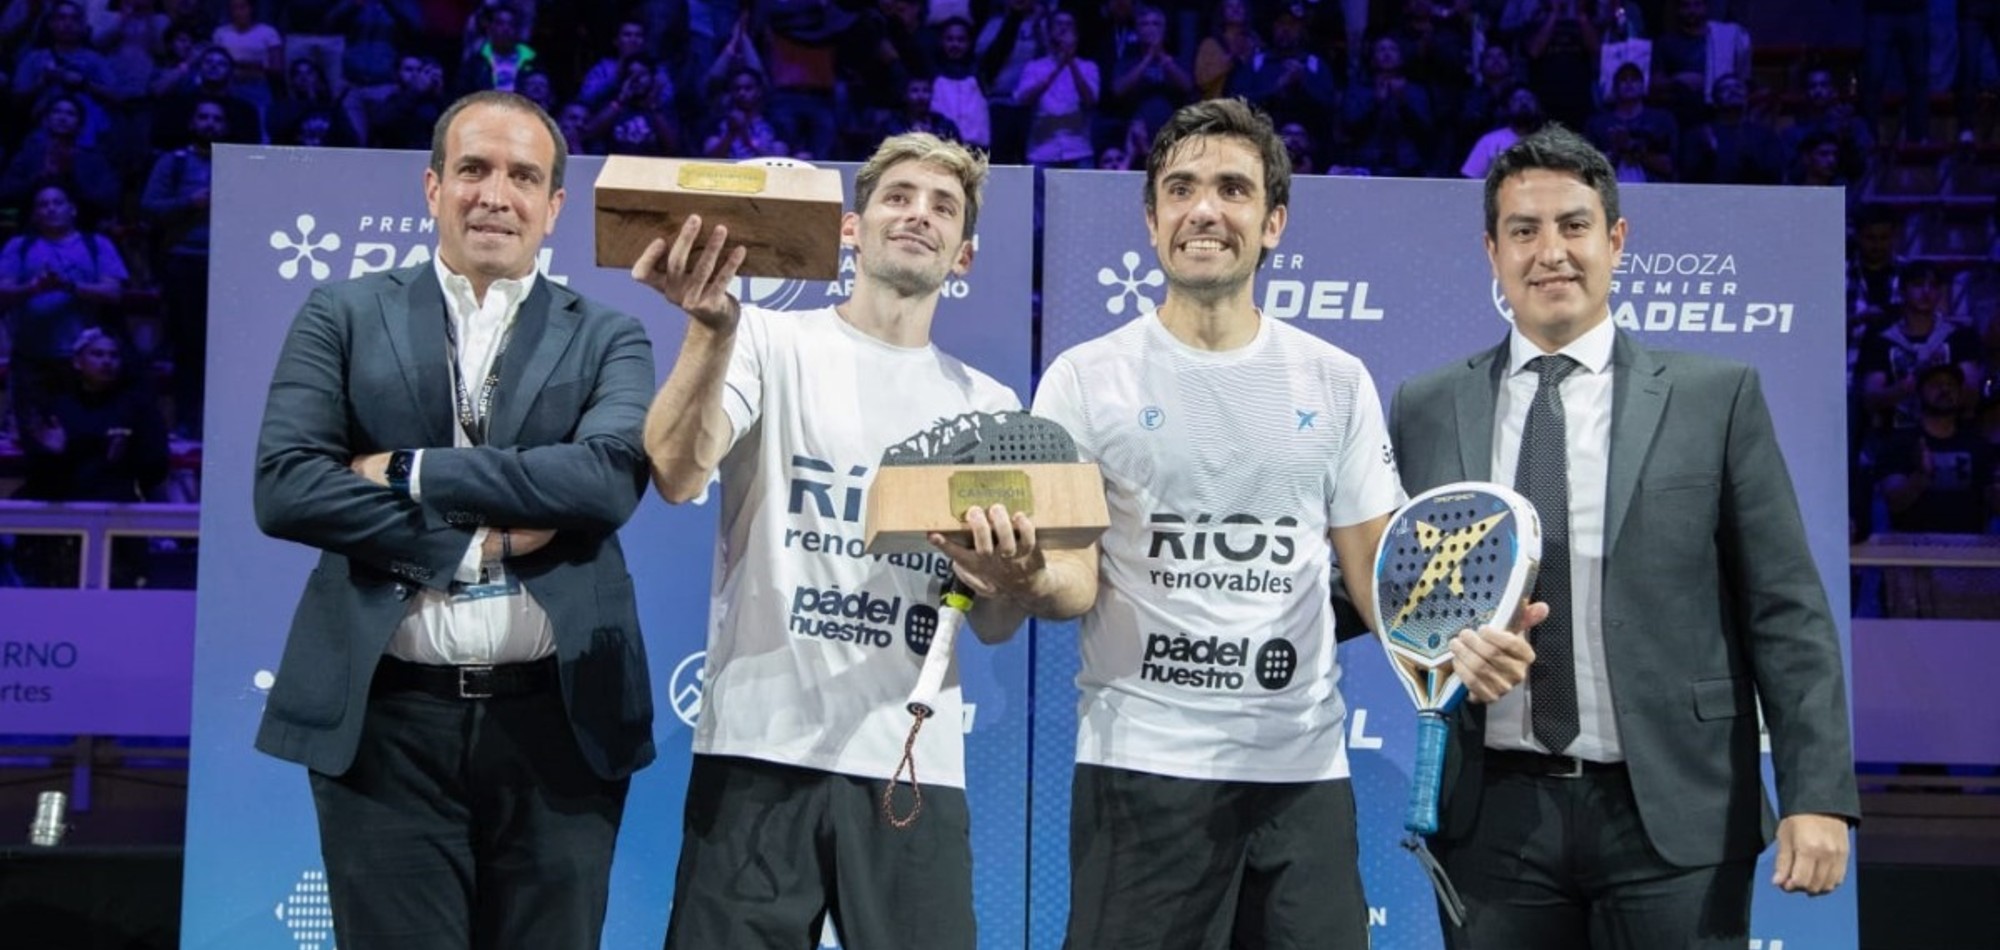 Success of the Mendoza Premier Padel P1 continues to pave the way for Padel